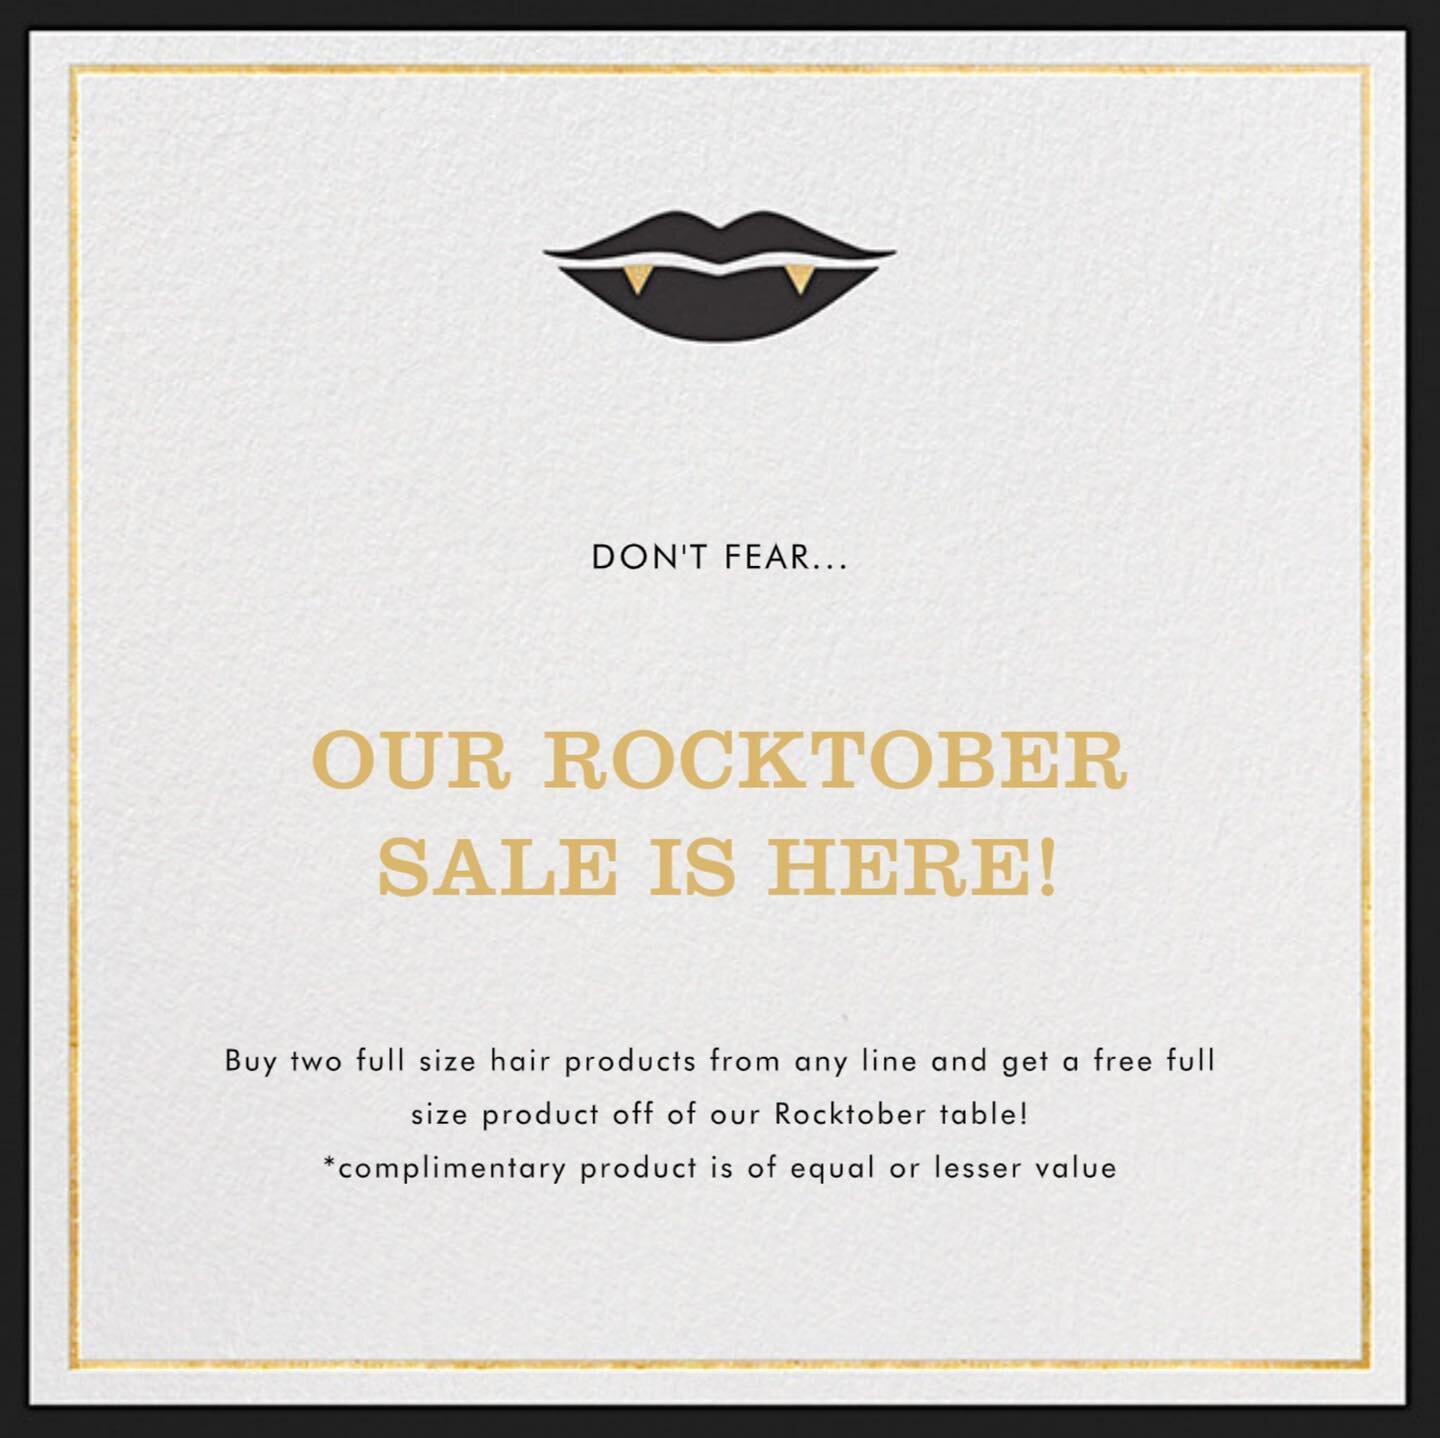 Don&rsquo;t fear&hellip; Rocktober is here! Stock up on your favorite products just in time for spooky season! 🖤🦇👻
&bull;
&bull;
&bull;

#GroveSalon #GreenAtGrove #GorgeousAtGrove #ShopLocalSalons #Albany #SolanoAve #ShopLocal #SalonLife #EastBayH